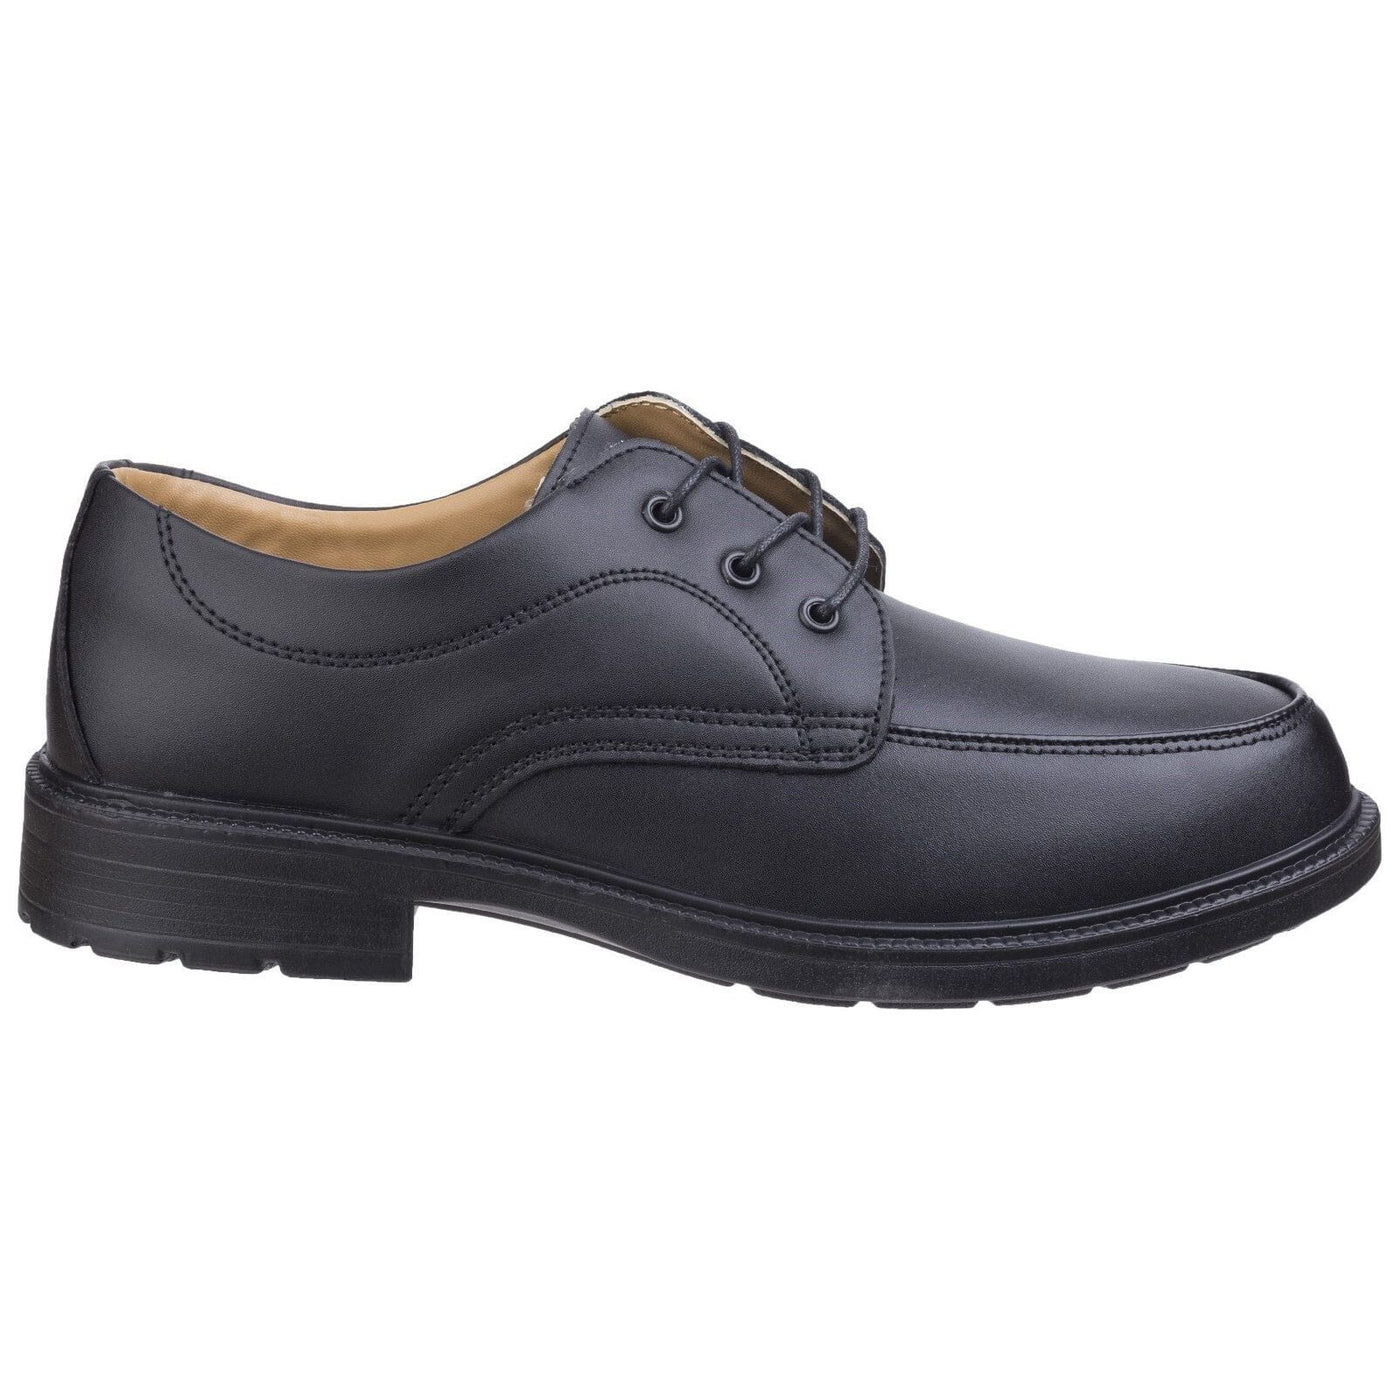 Amblers Fs65 Gibson Safety Shoes - Womens - Sale